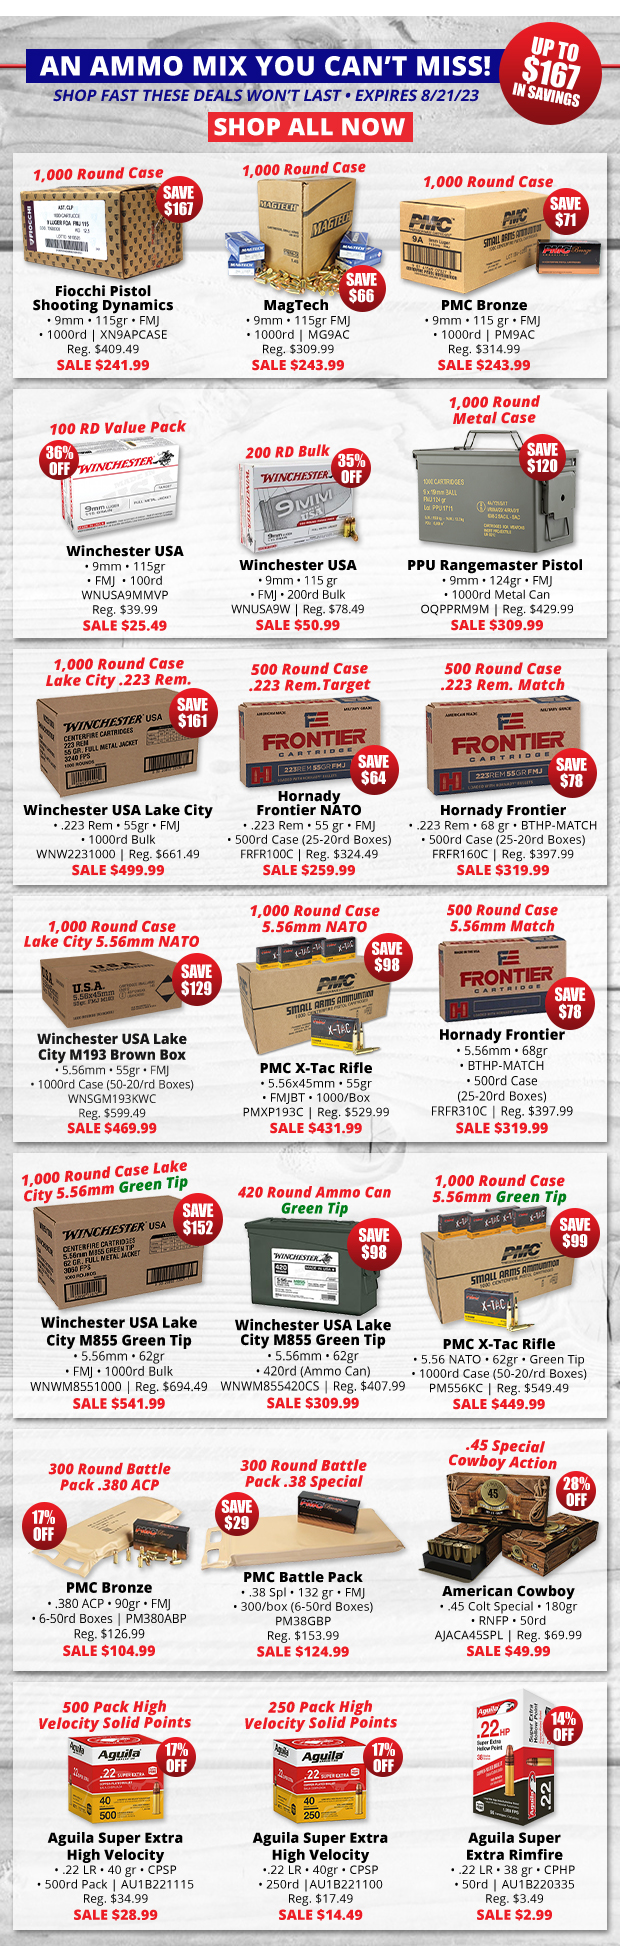 Ammo Deals Up to $167 Off!